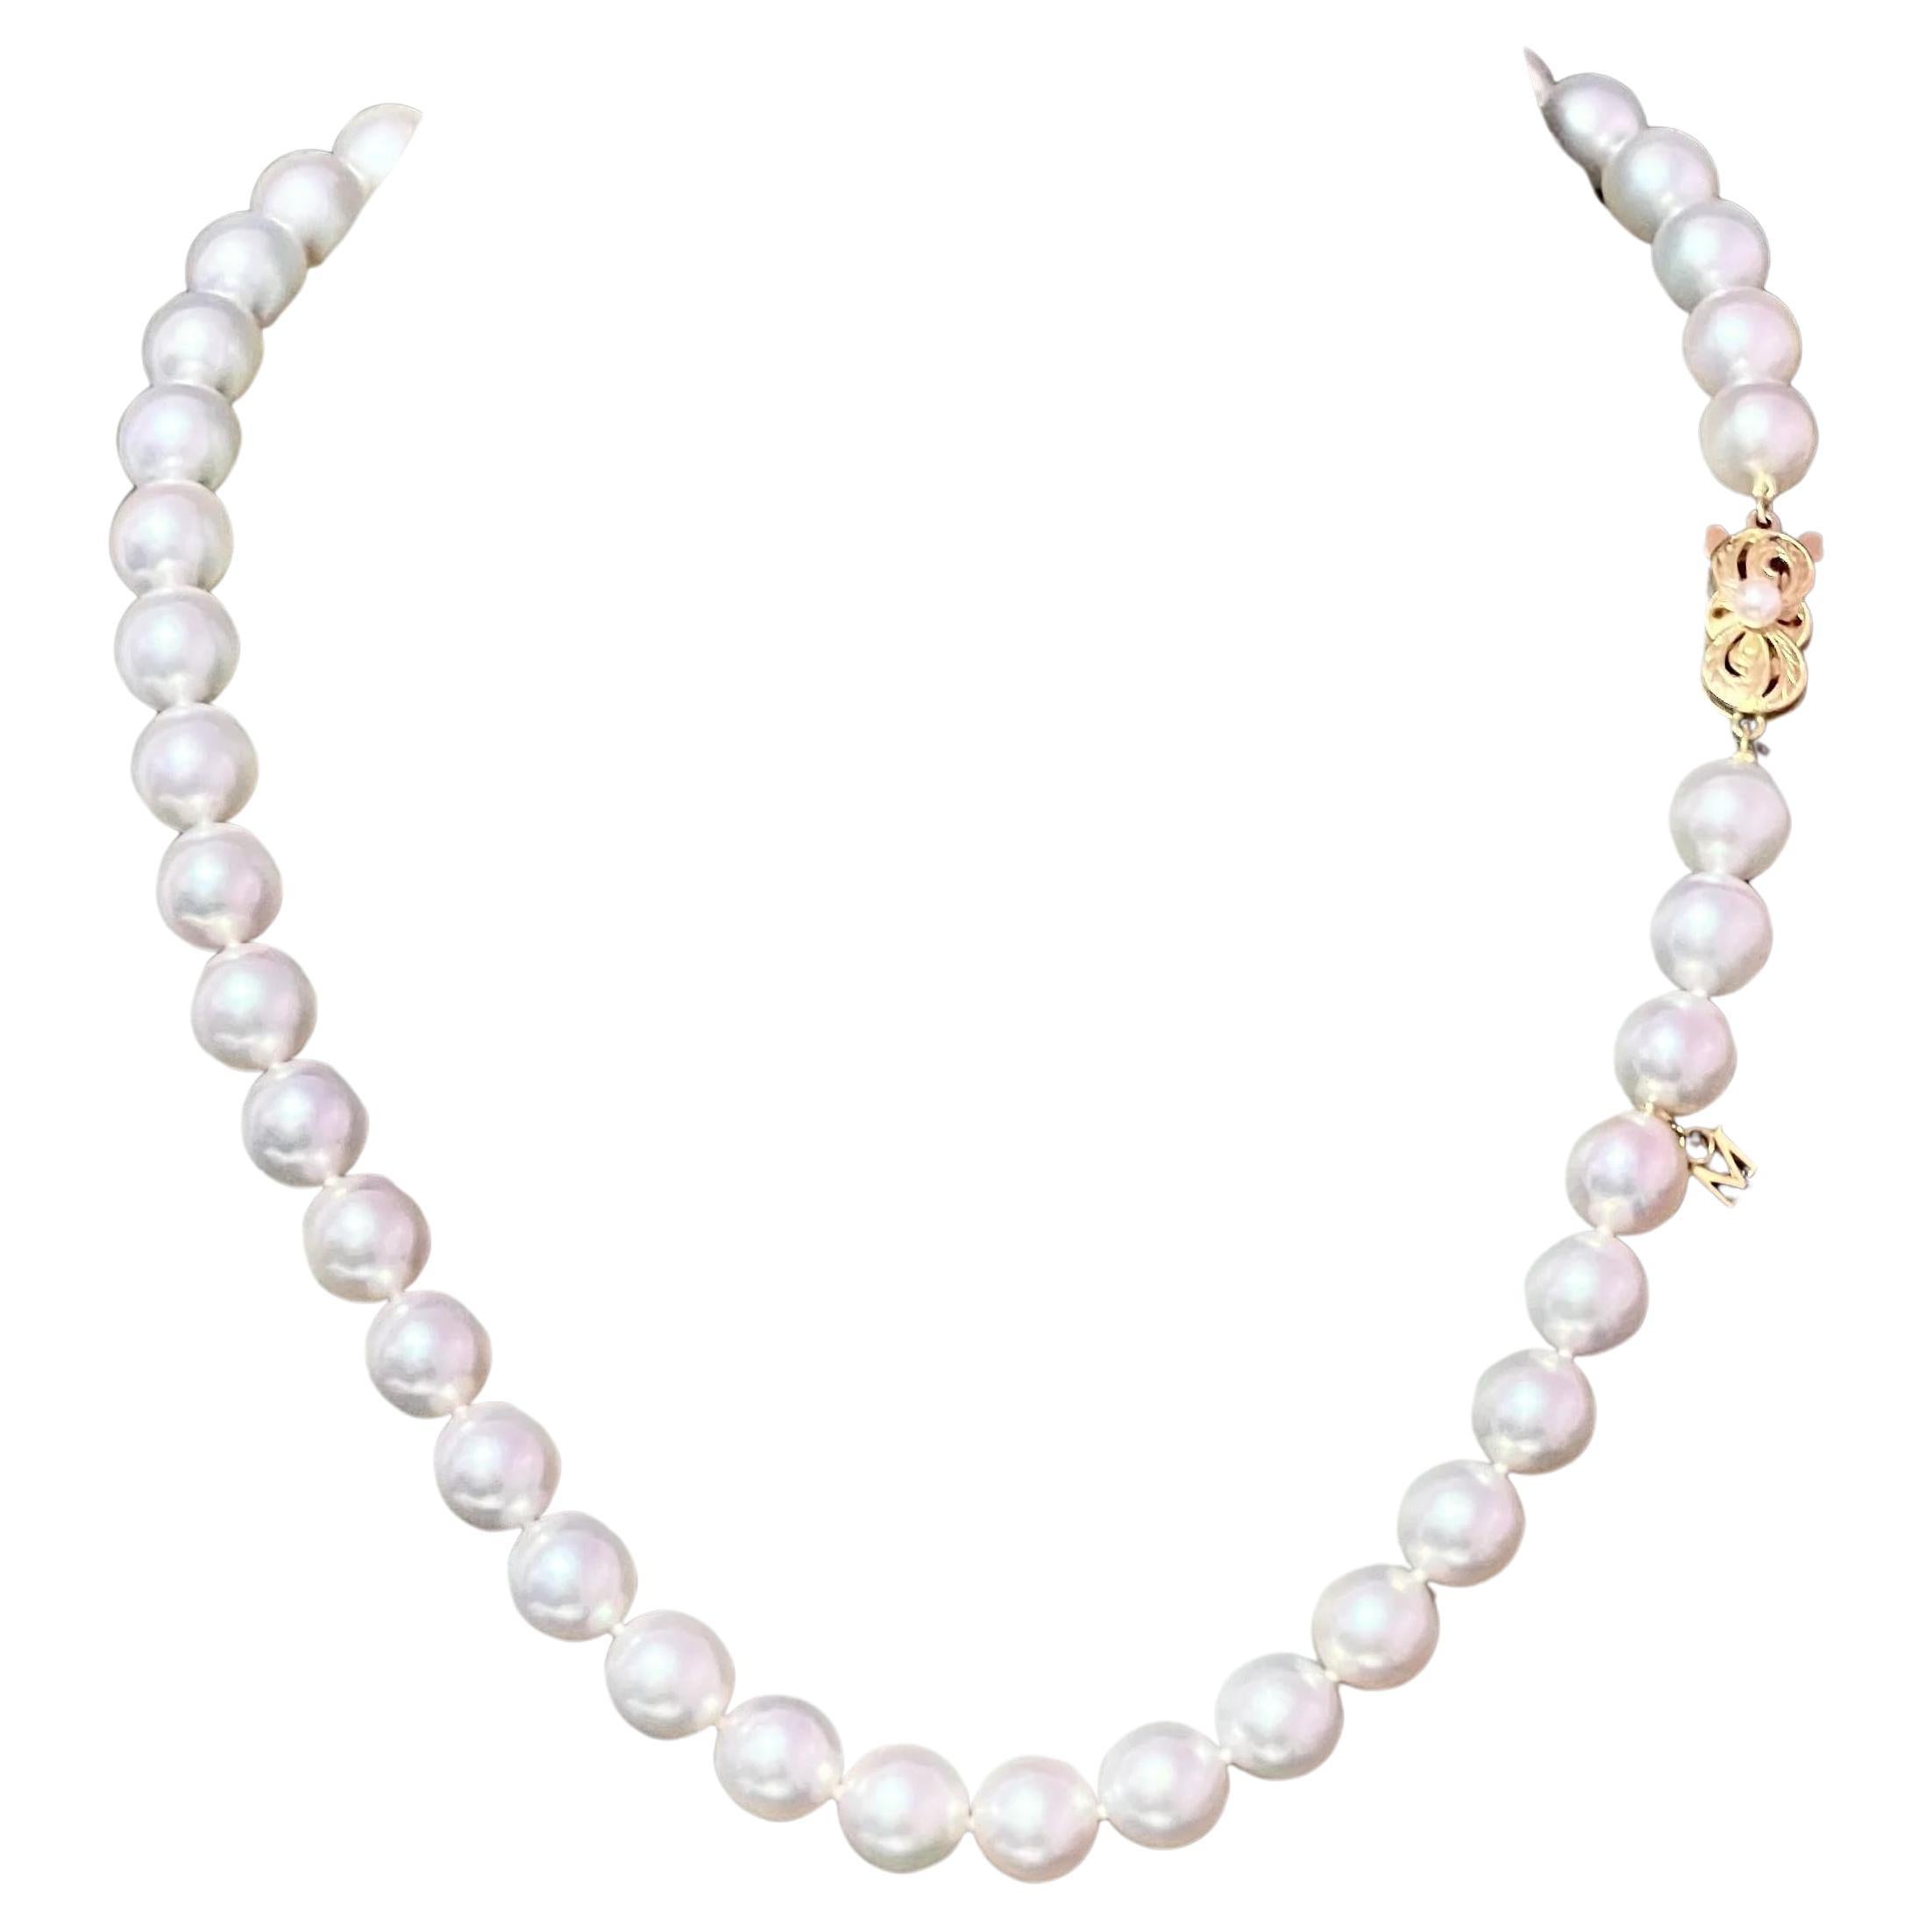 Mikimoto Estate Akoya Pearl Necklace 17.5" 18k Y Gold 9.5 mm Certified  For Sale